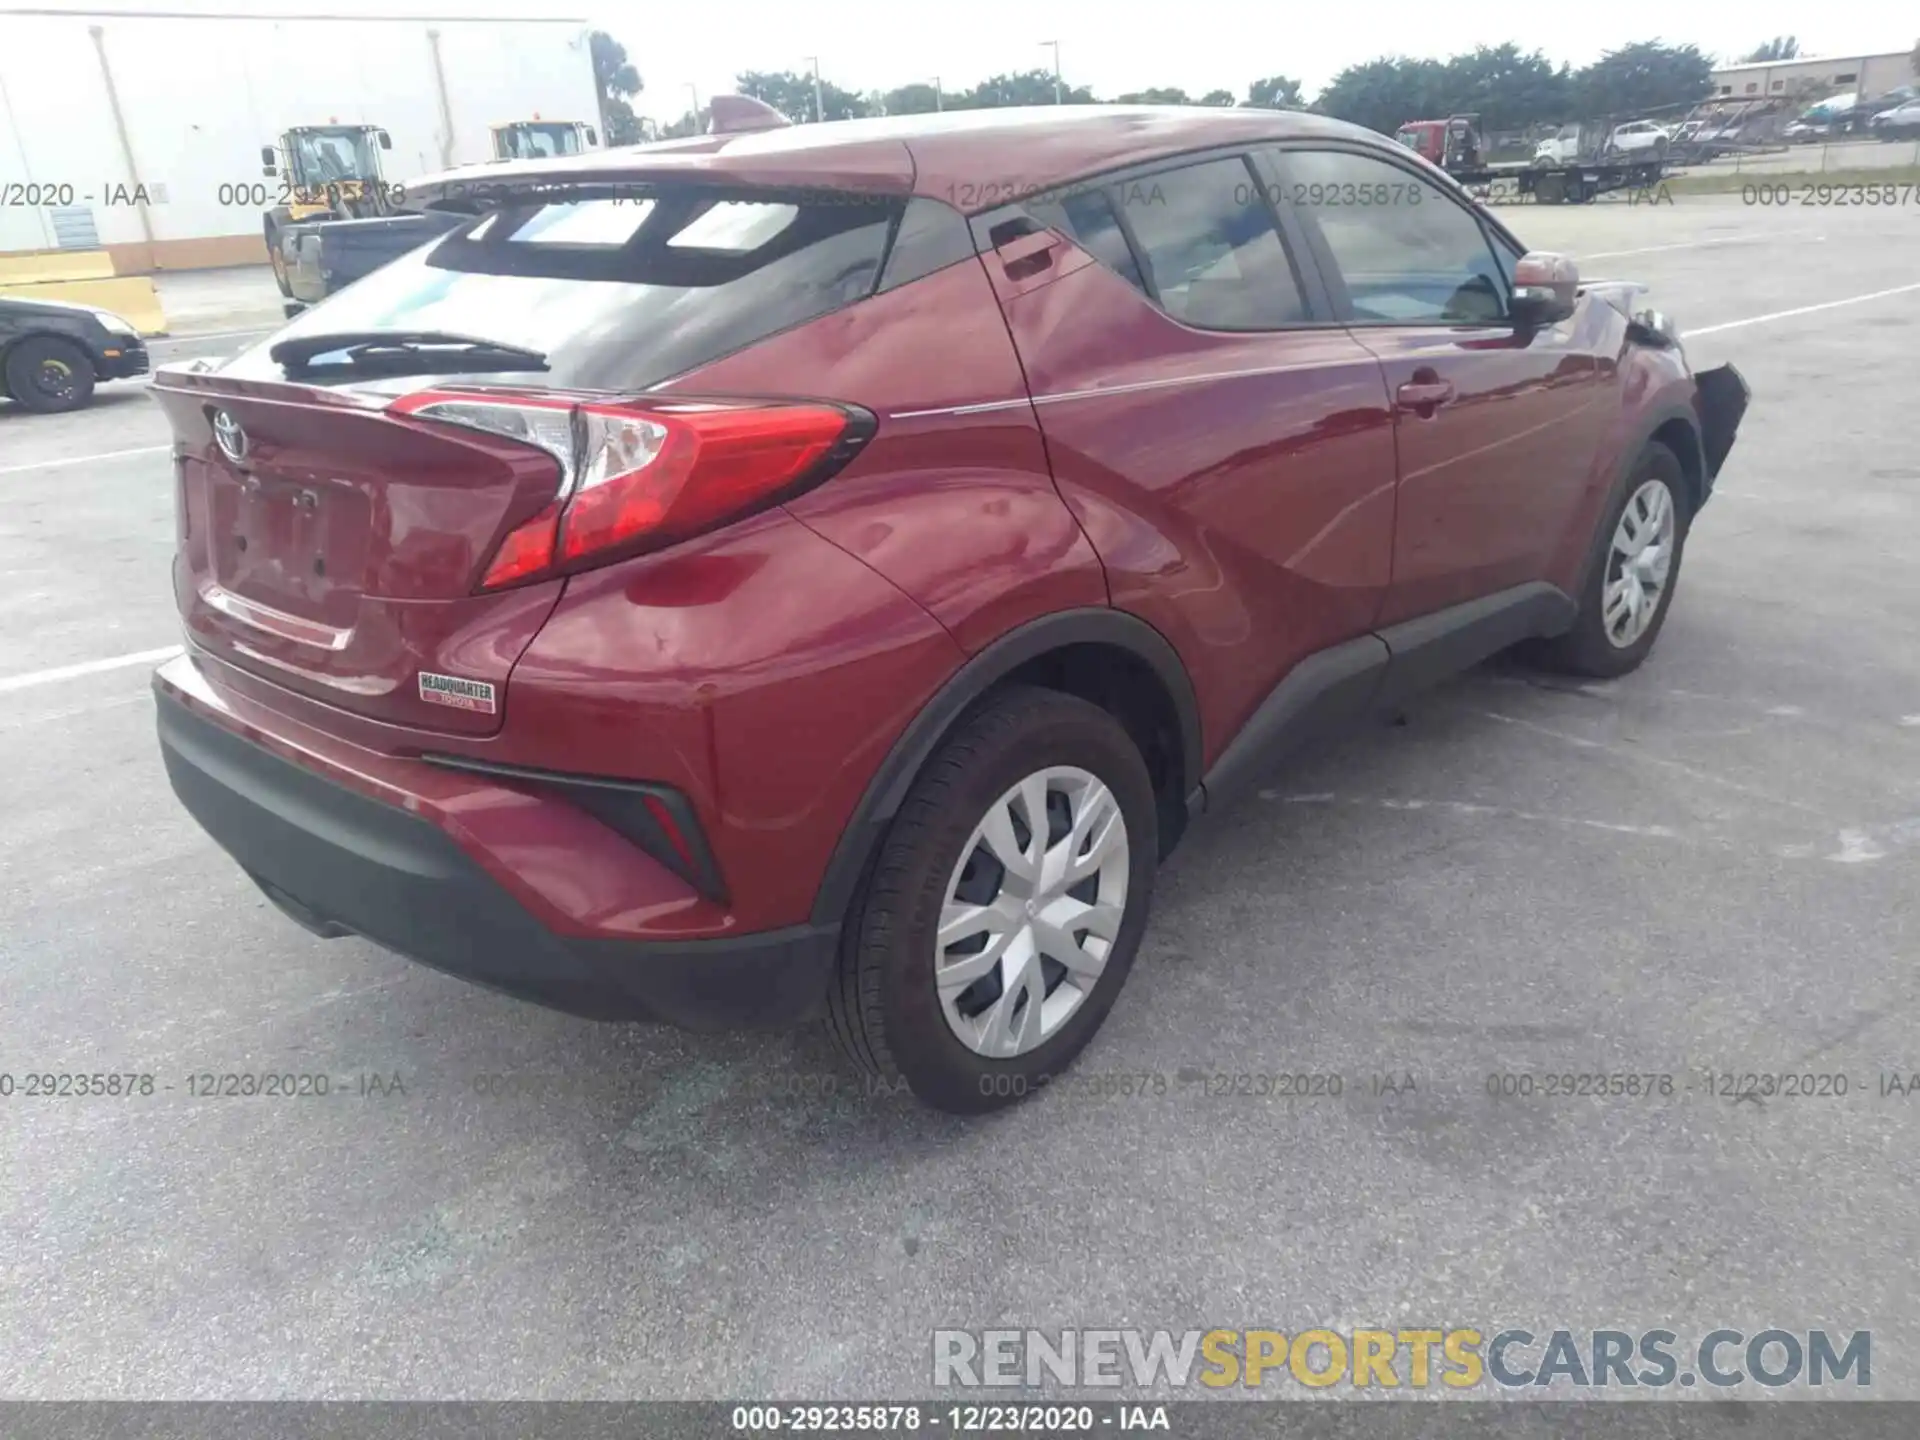 4 Photograph of a damaged car NMTKHMBXXKR087732 TOYOTA C-HR 2019